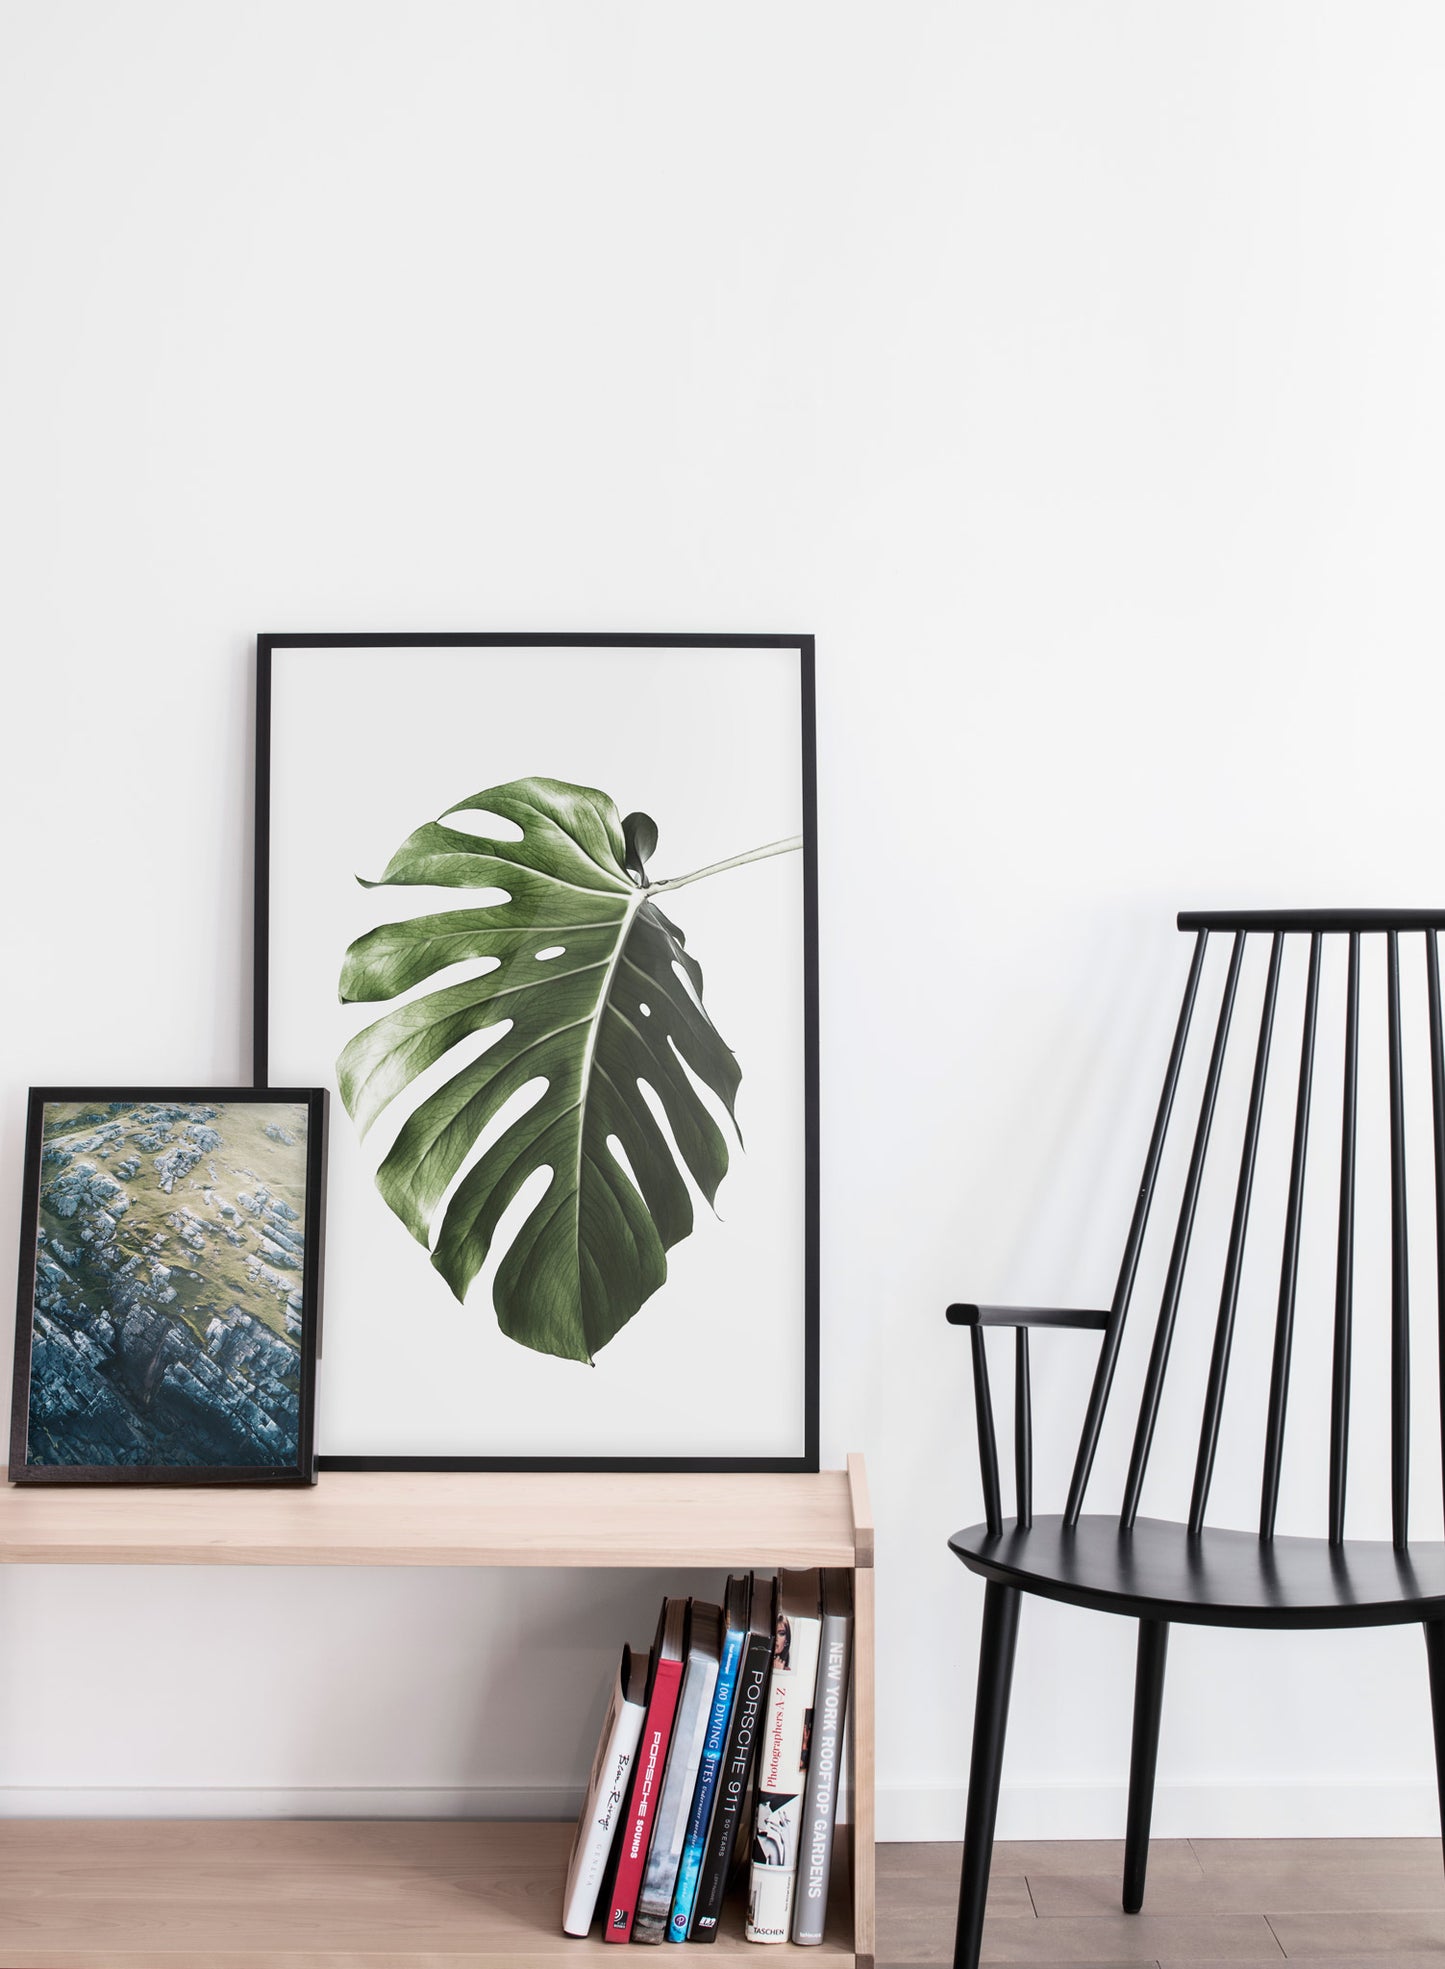 Scandinavian poster by Opposite Wall with art photo of botanical leaf called Upside Down - Living room with a black chair